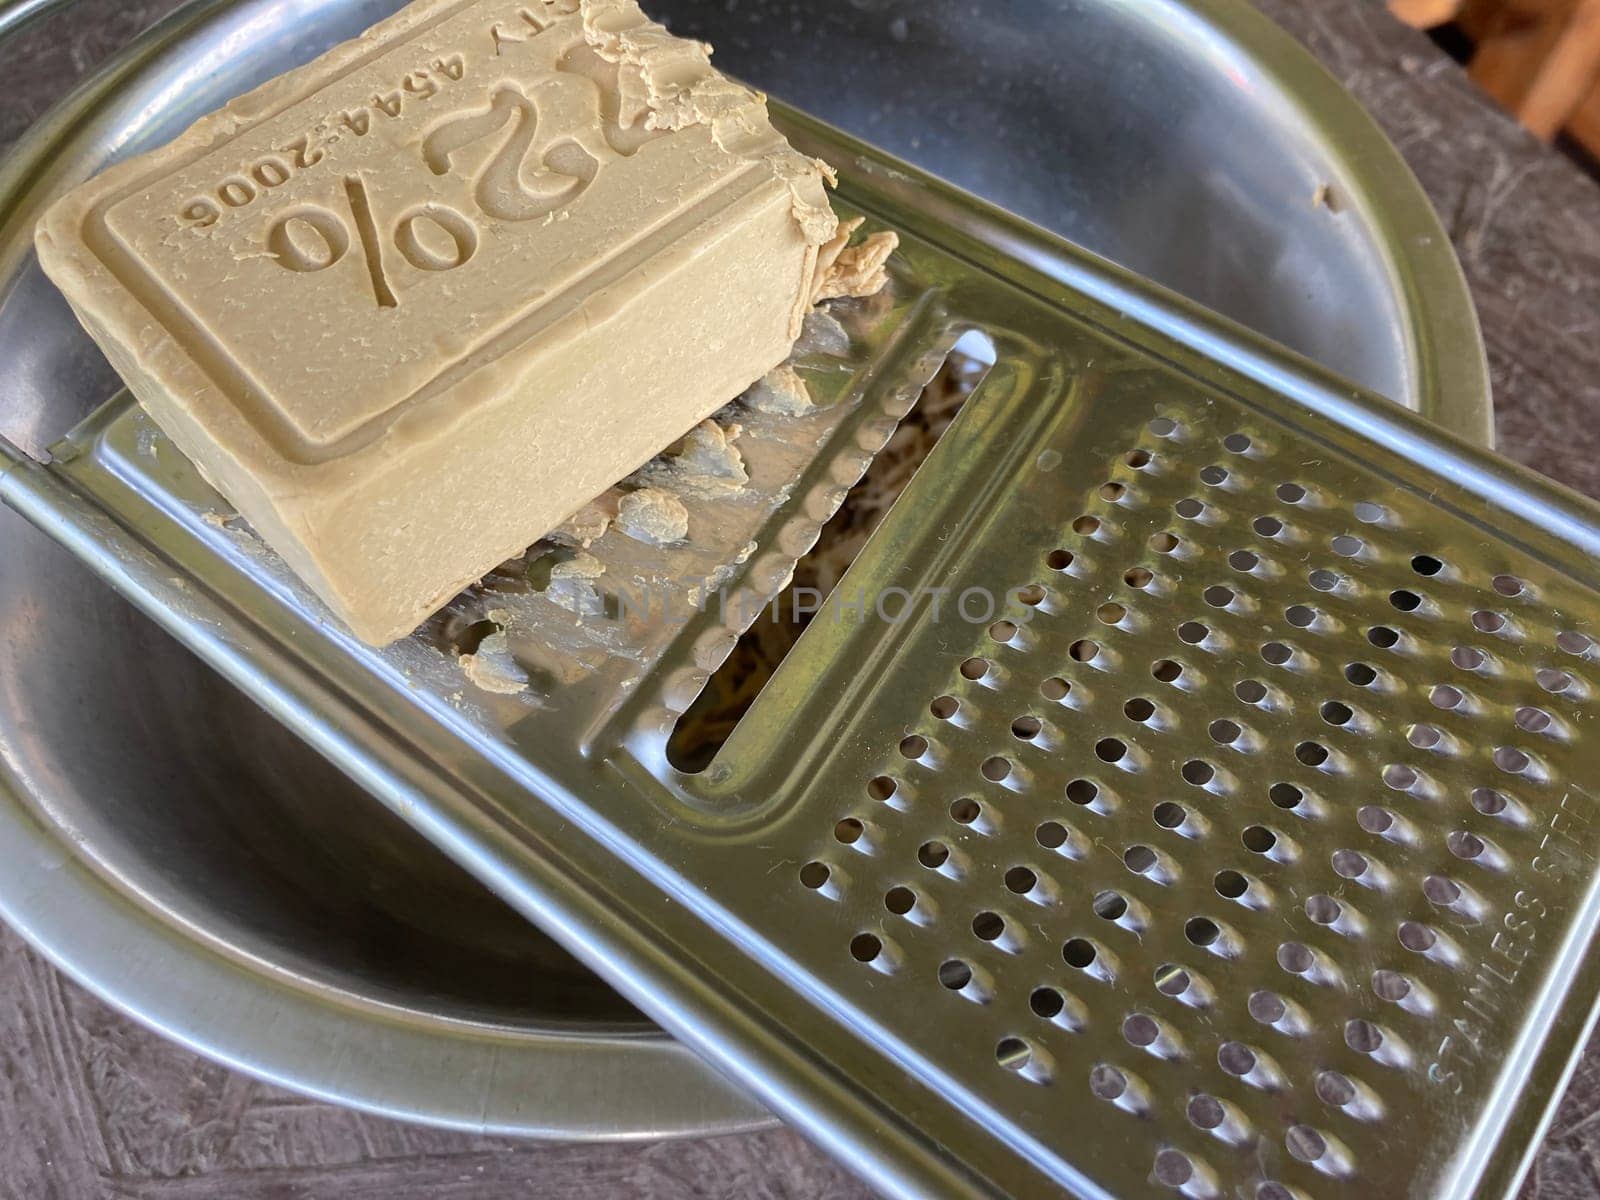 Grating laundry soap on a the food grater